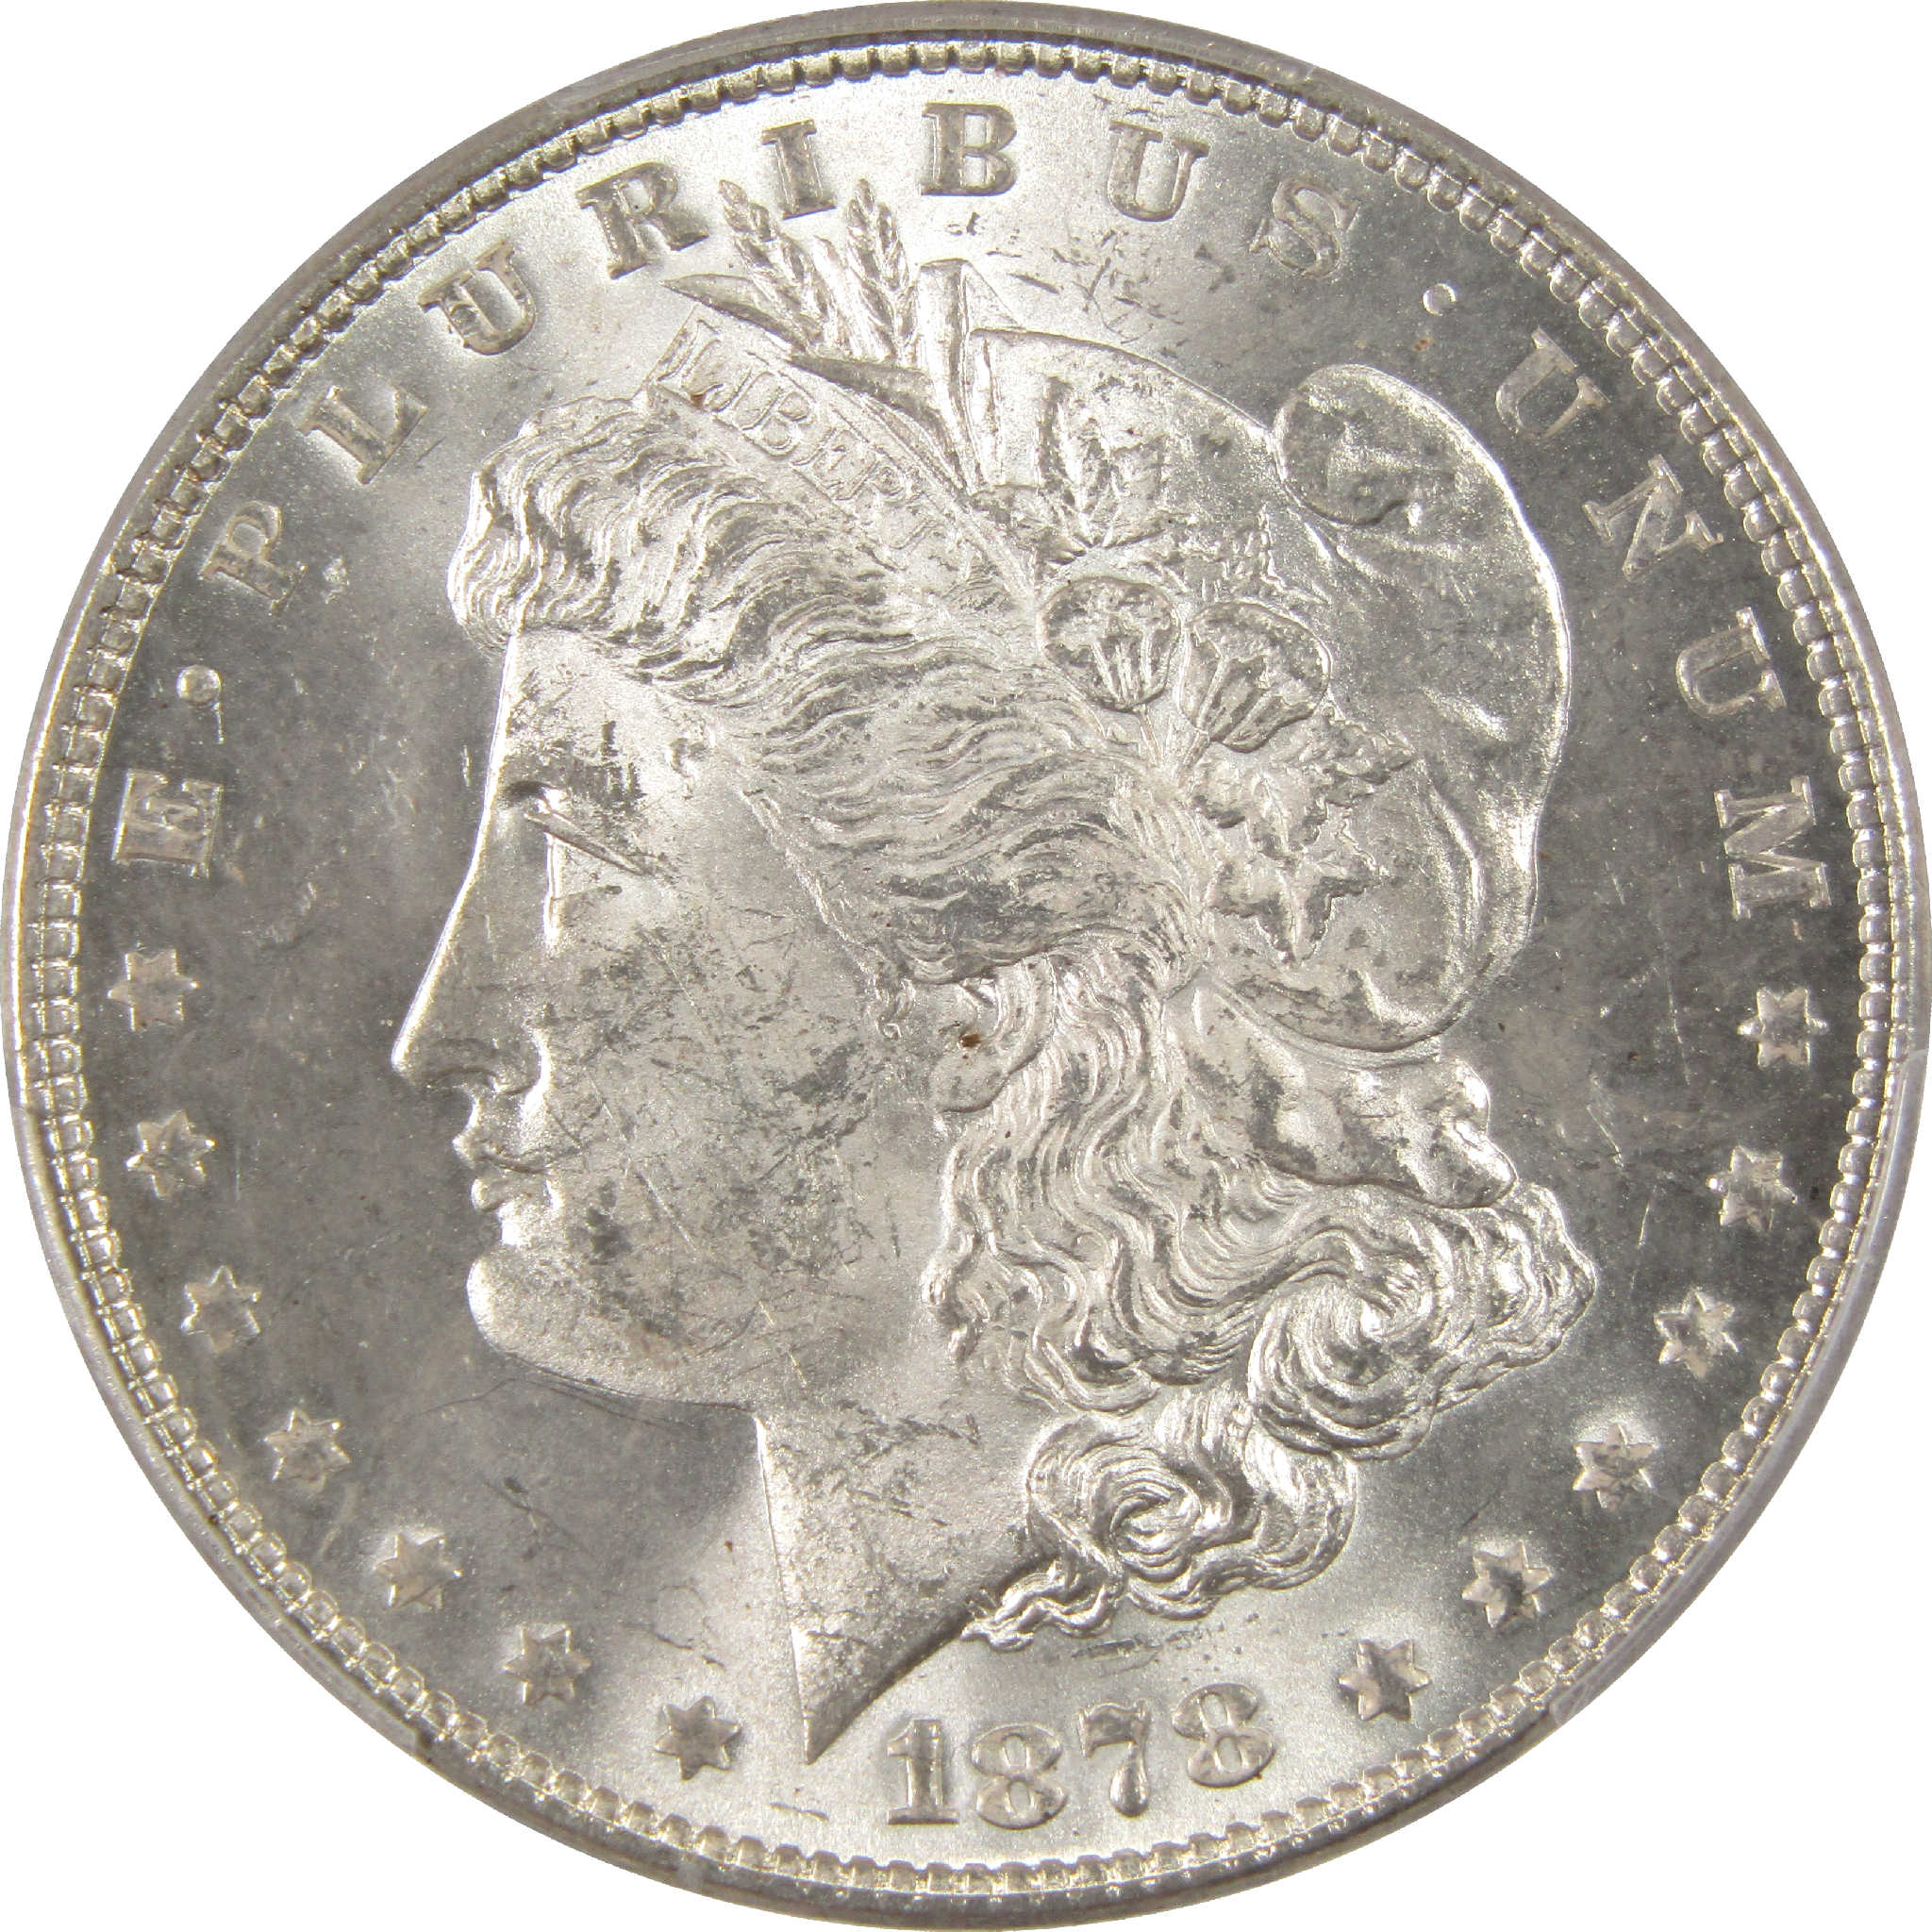 1878 7TF Rev 78 Morgan Dollar MS 62 PCGS Silver $1 Unc SKU:I11322 - Morgan coin - Morgan silver dollar - Morgan silver dollar for sale - Profile Coins &amp; Collectibles